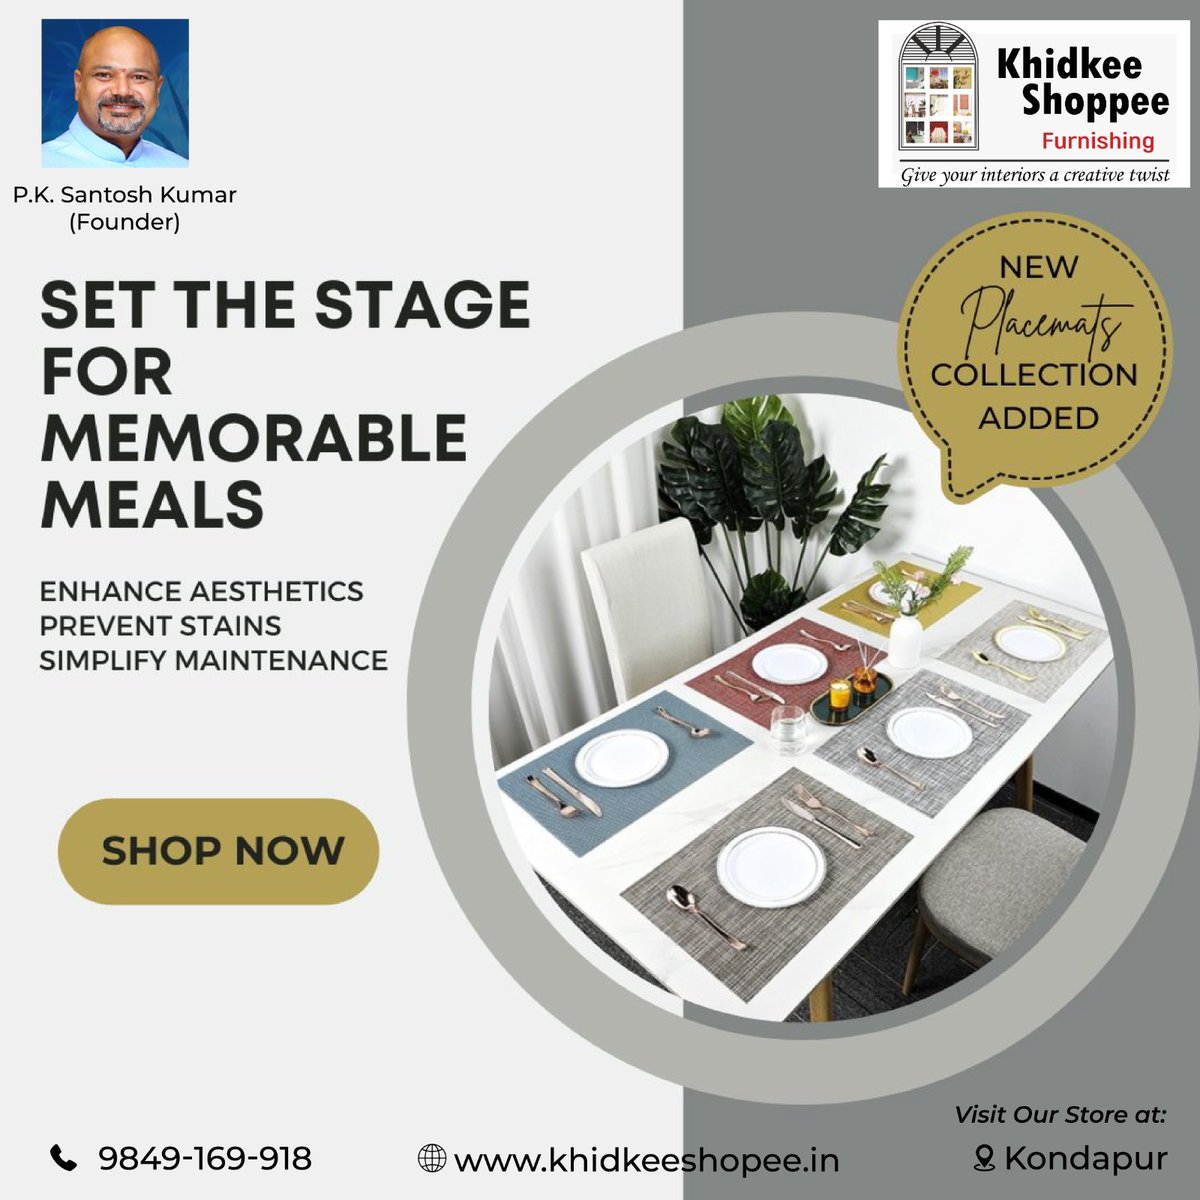 🌟 Elevate your dining experience with our new placemats! Visit Khidkee Shoppee today and set the stage for memorable meals. Shop now and transform your dining space! 🍽️✨ 

#khidkeeshoppee #homedecor #NewCollection #Placemats #DiningDecor #DiningExperience #shopnow #Hyderabad